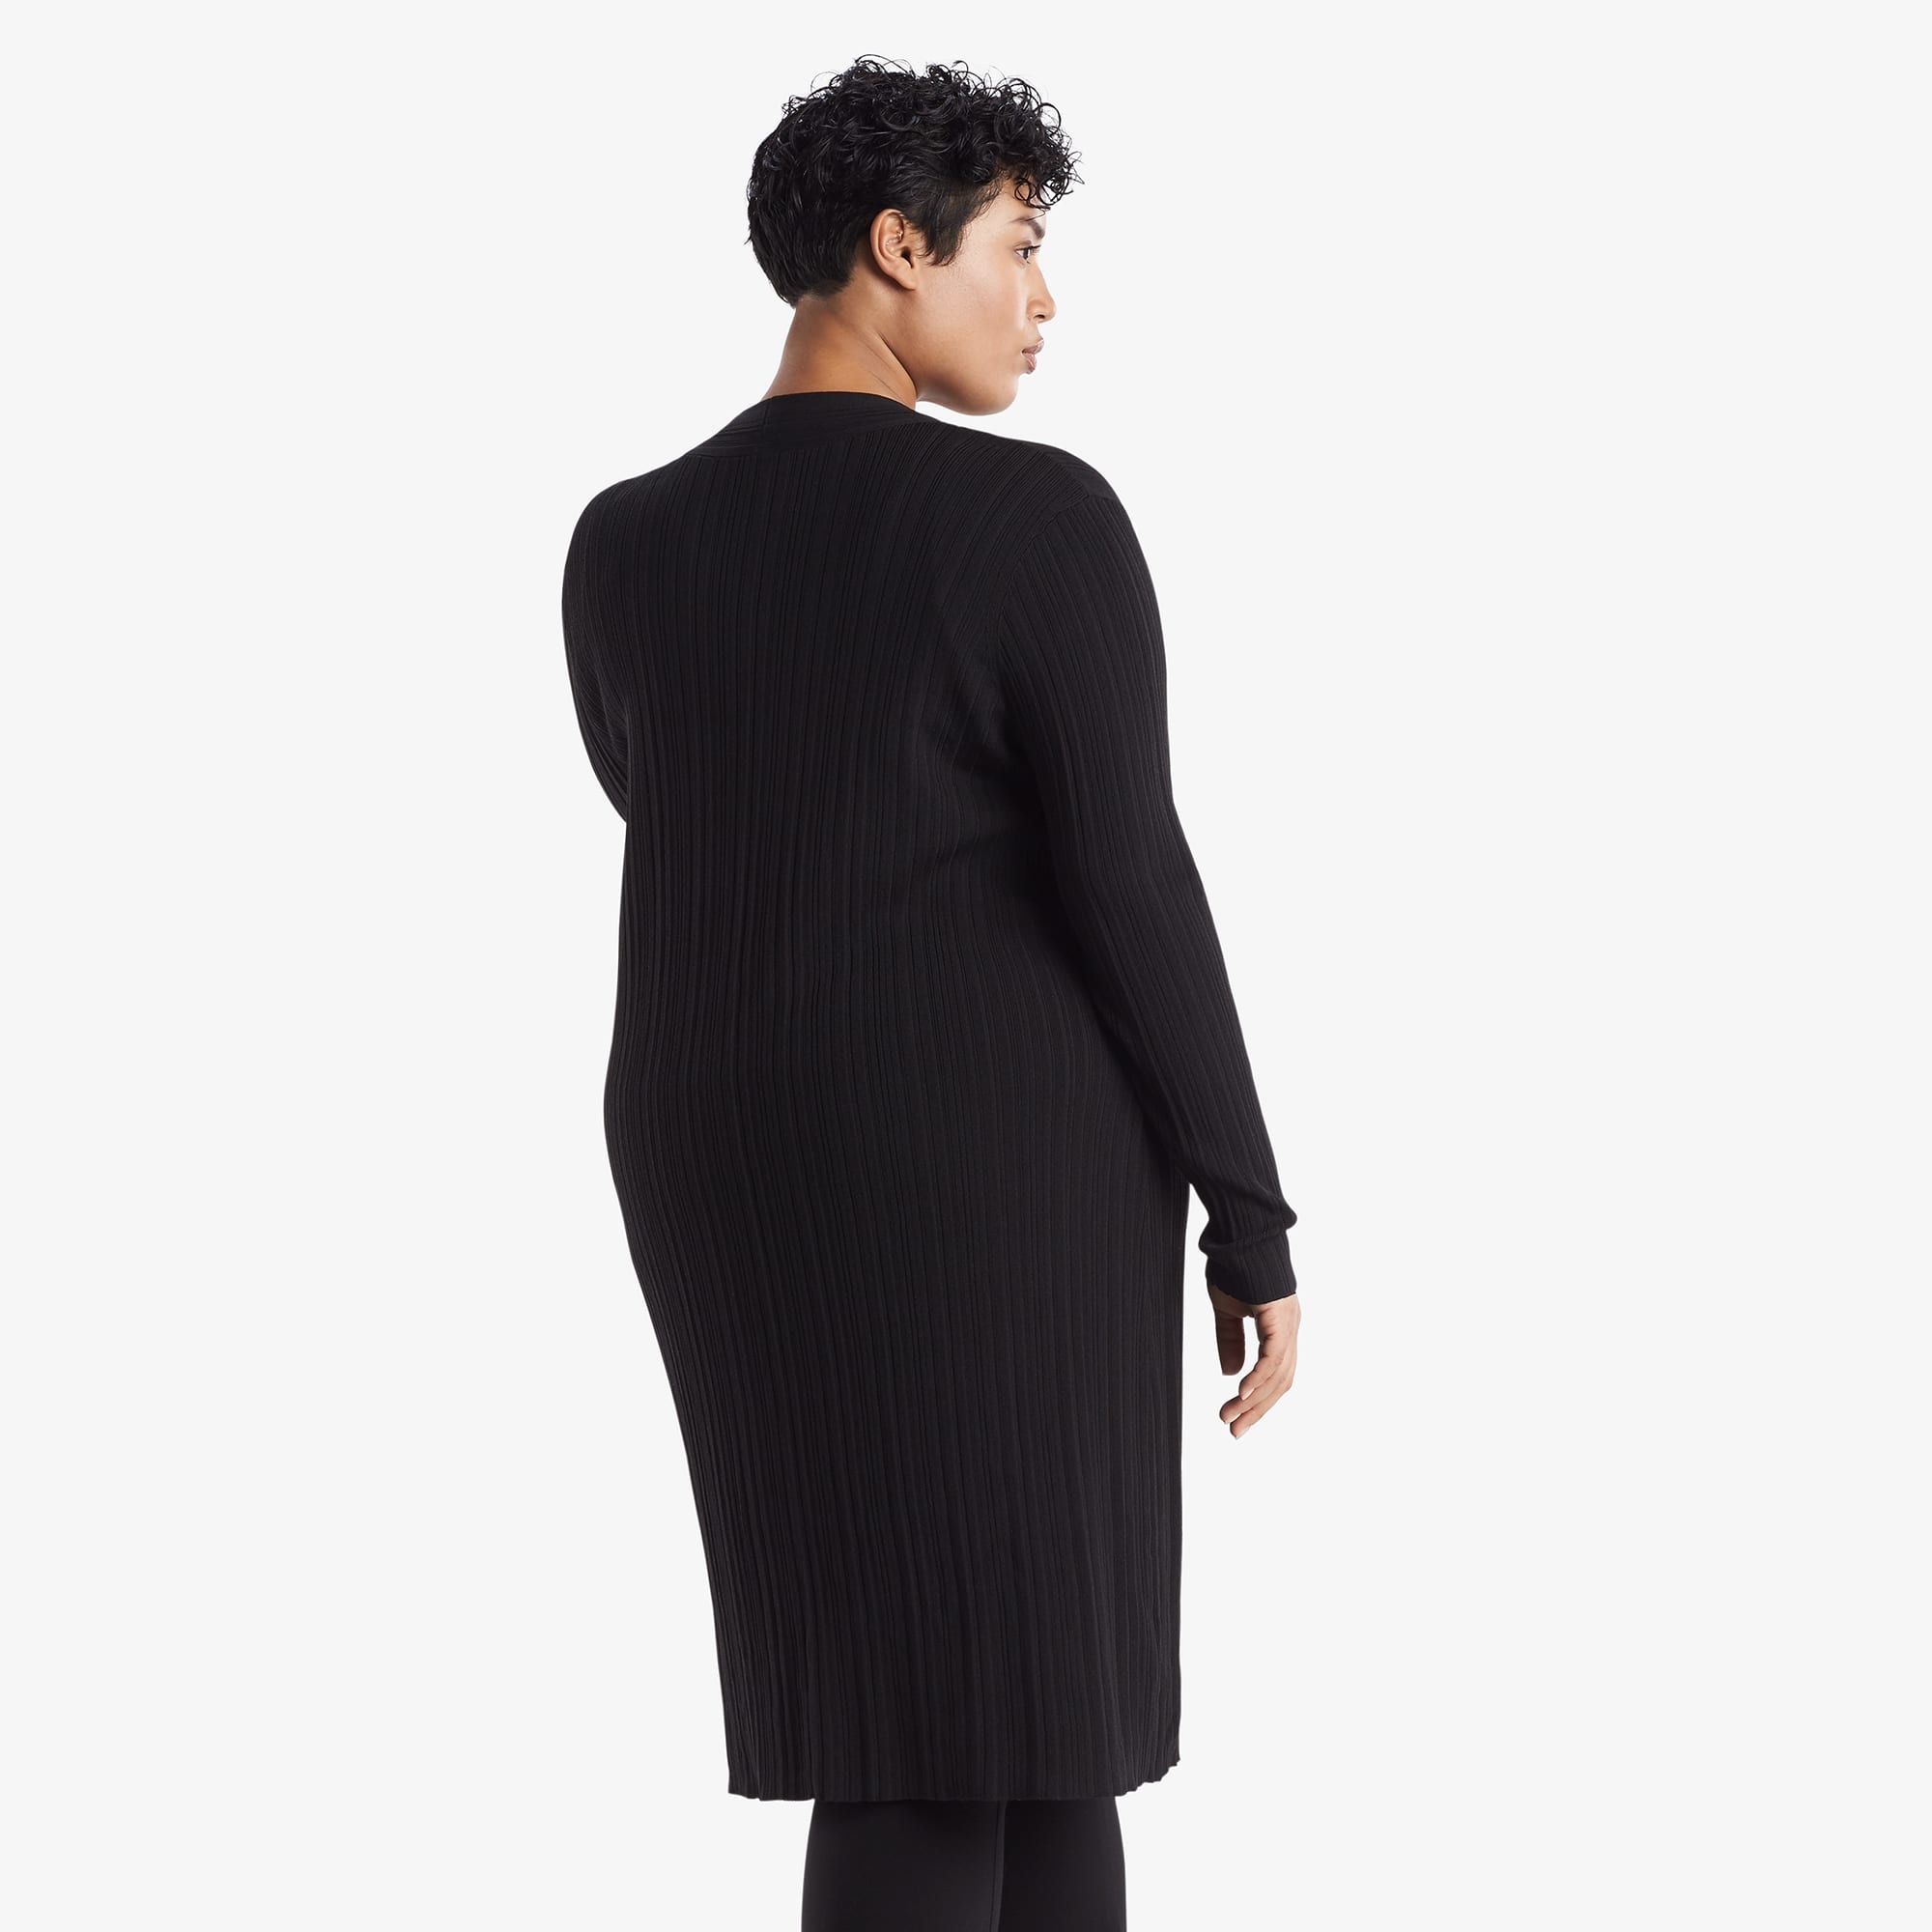 Back image of a woman wearing the Molly Cardigan - Textured Knit in Black